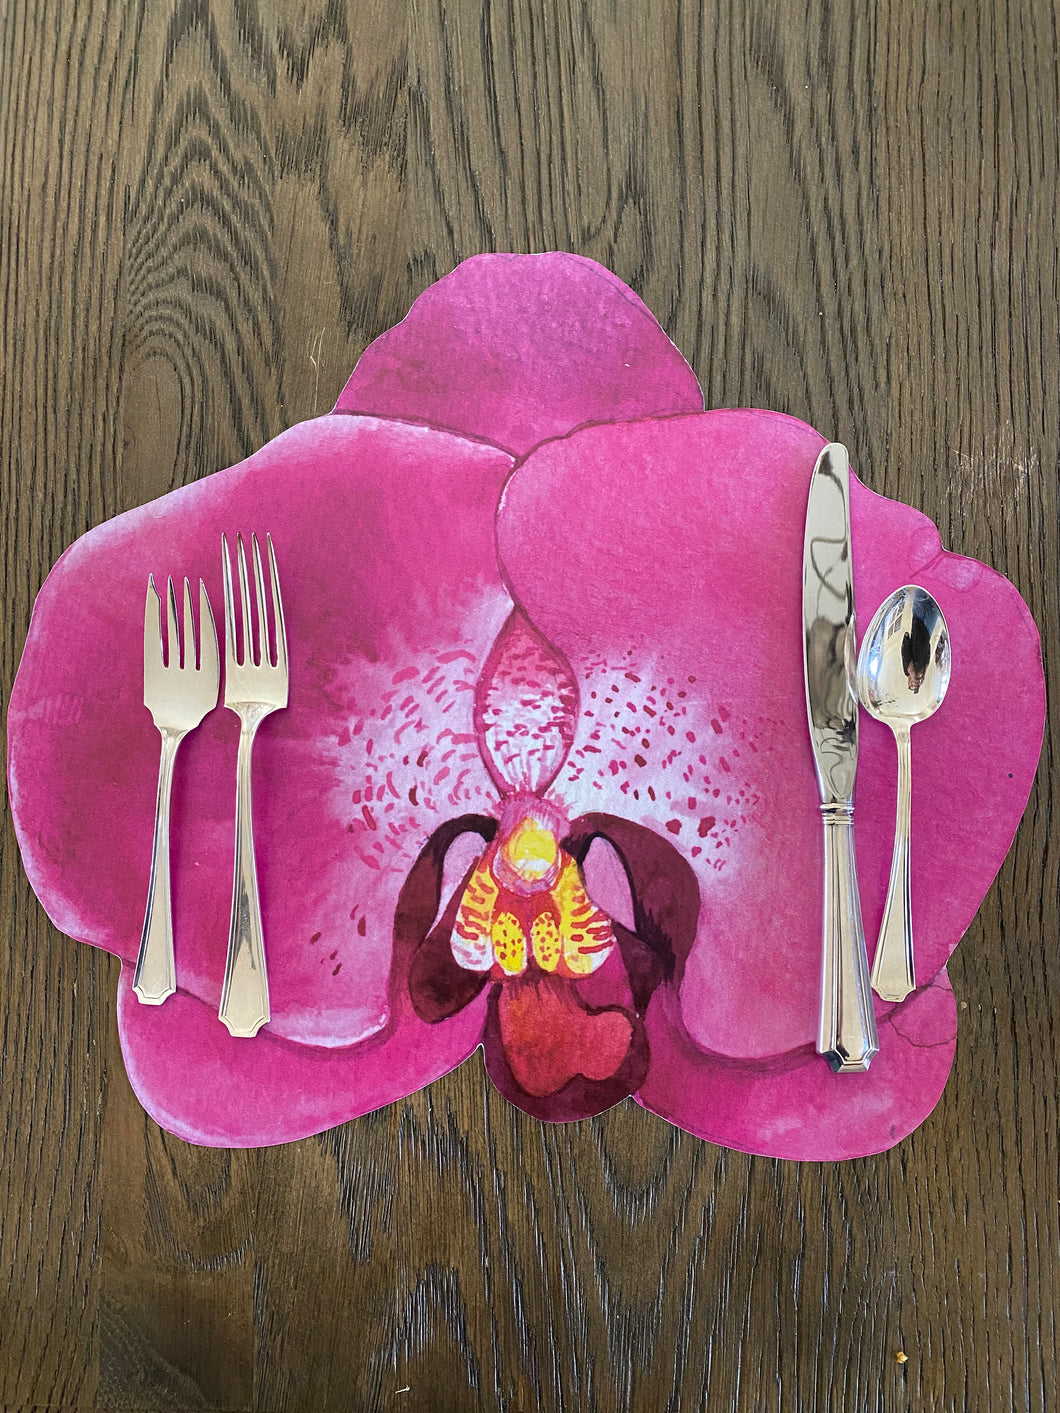 Watercolor Orchid Flower Placemat Mothers day gift gift for her indoor outdoor poolside summer spring floral tablesetting